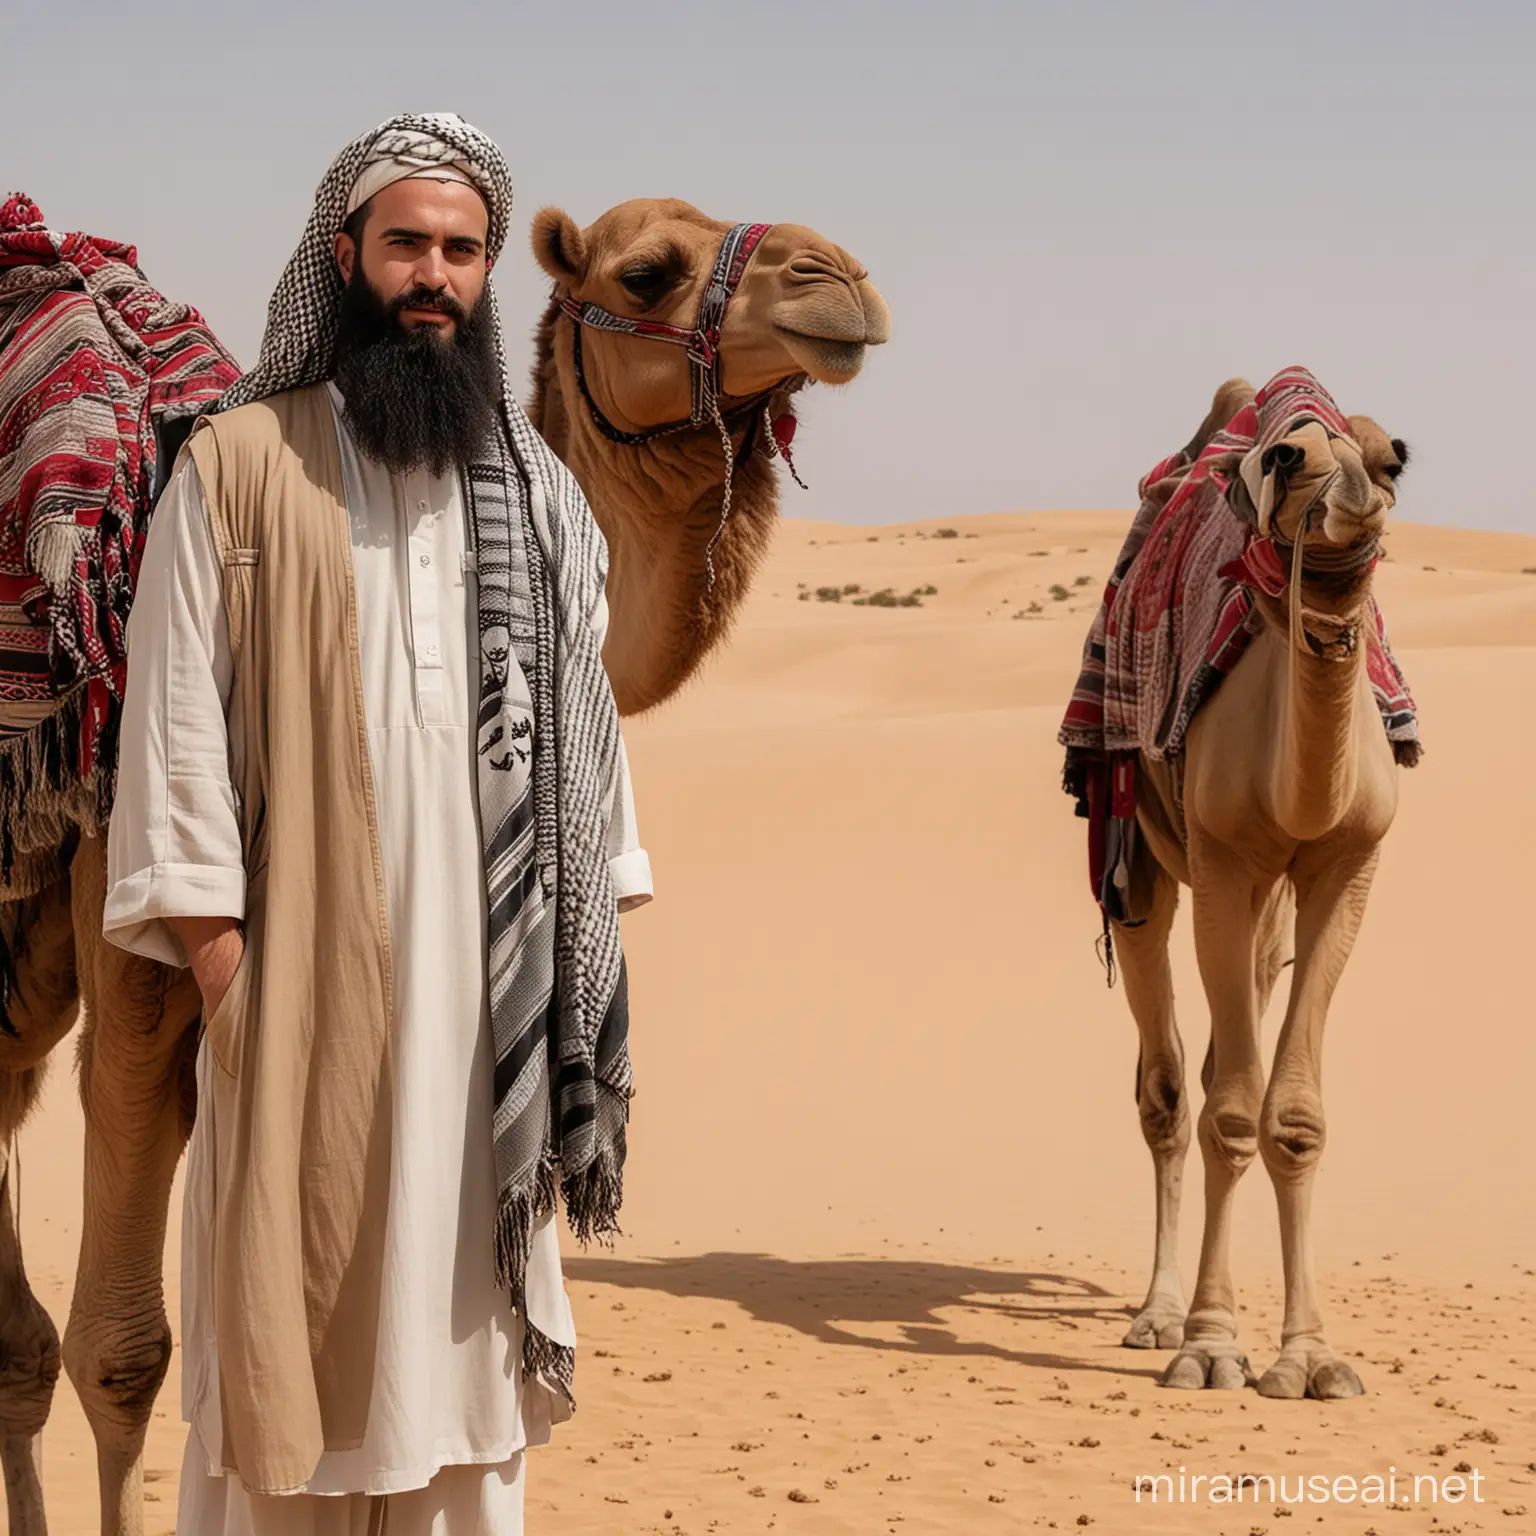 
a man with a heavy beard wearing a thobe and keffiyeh, standing beside a camel in the desert
